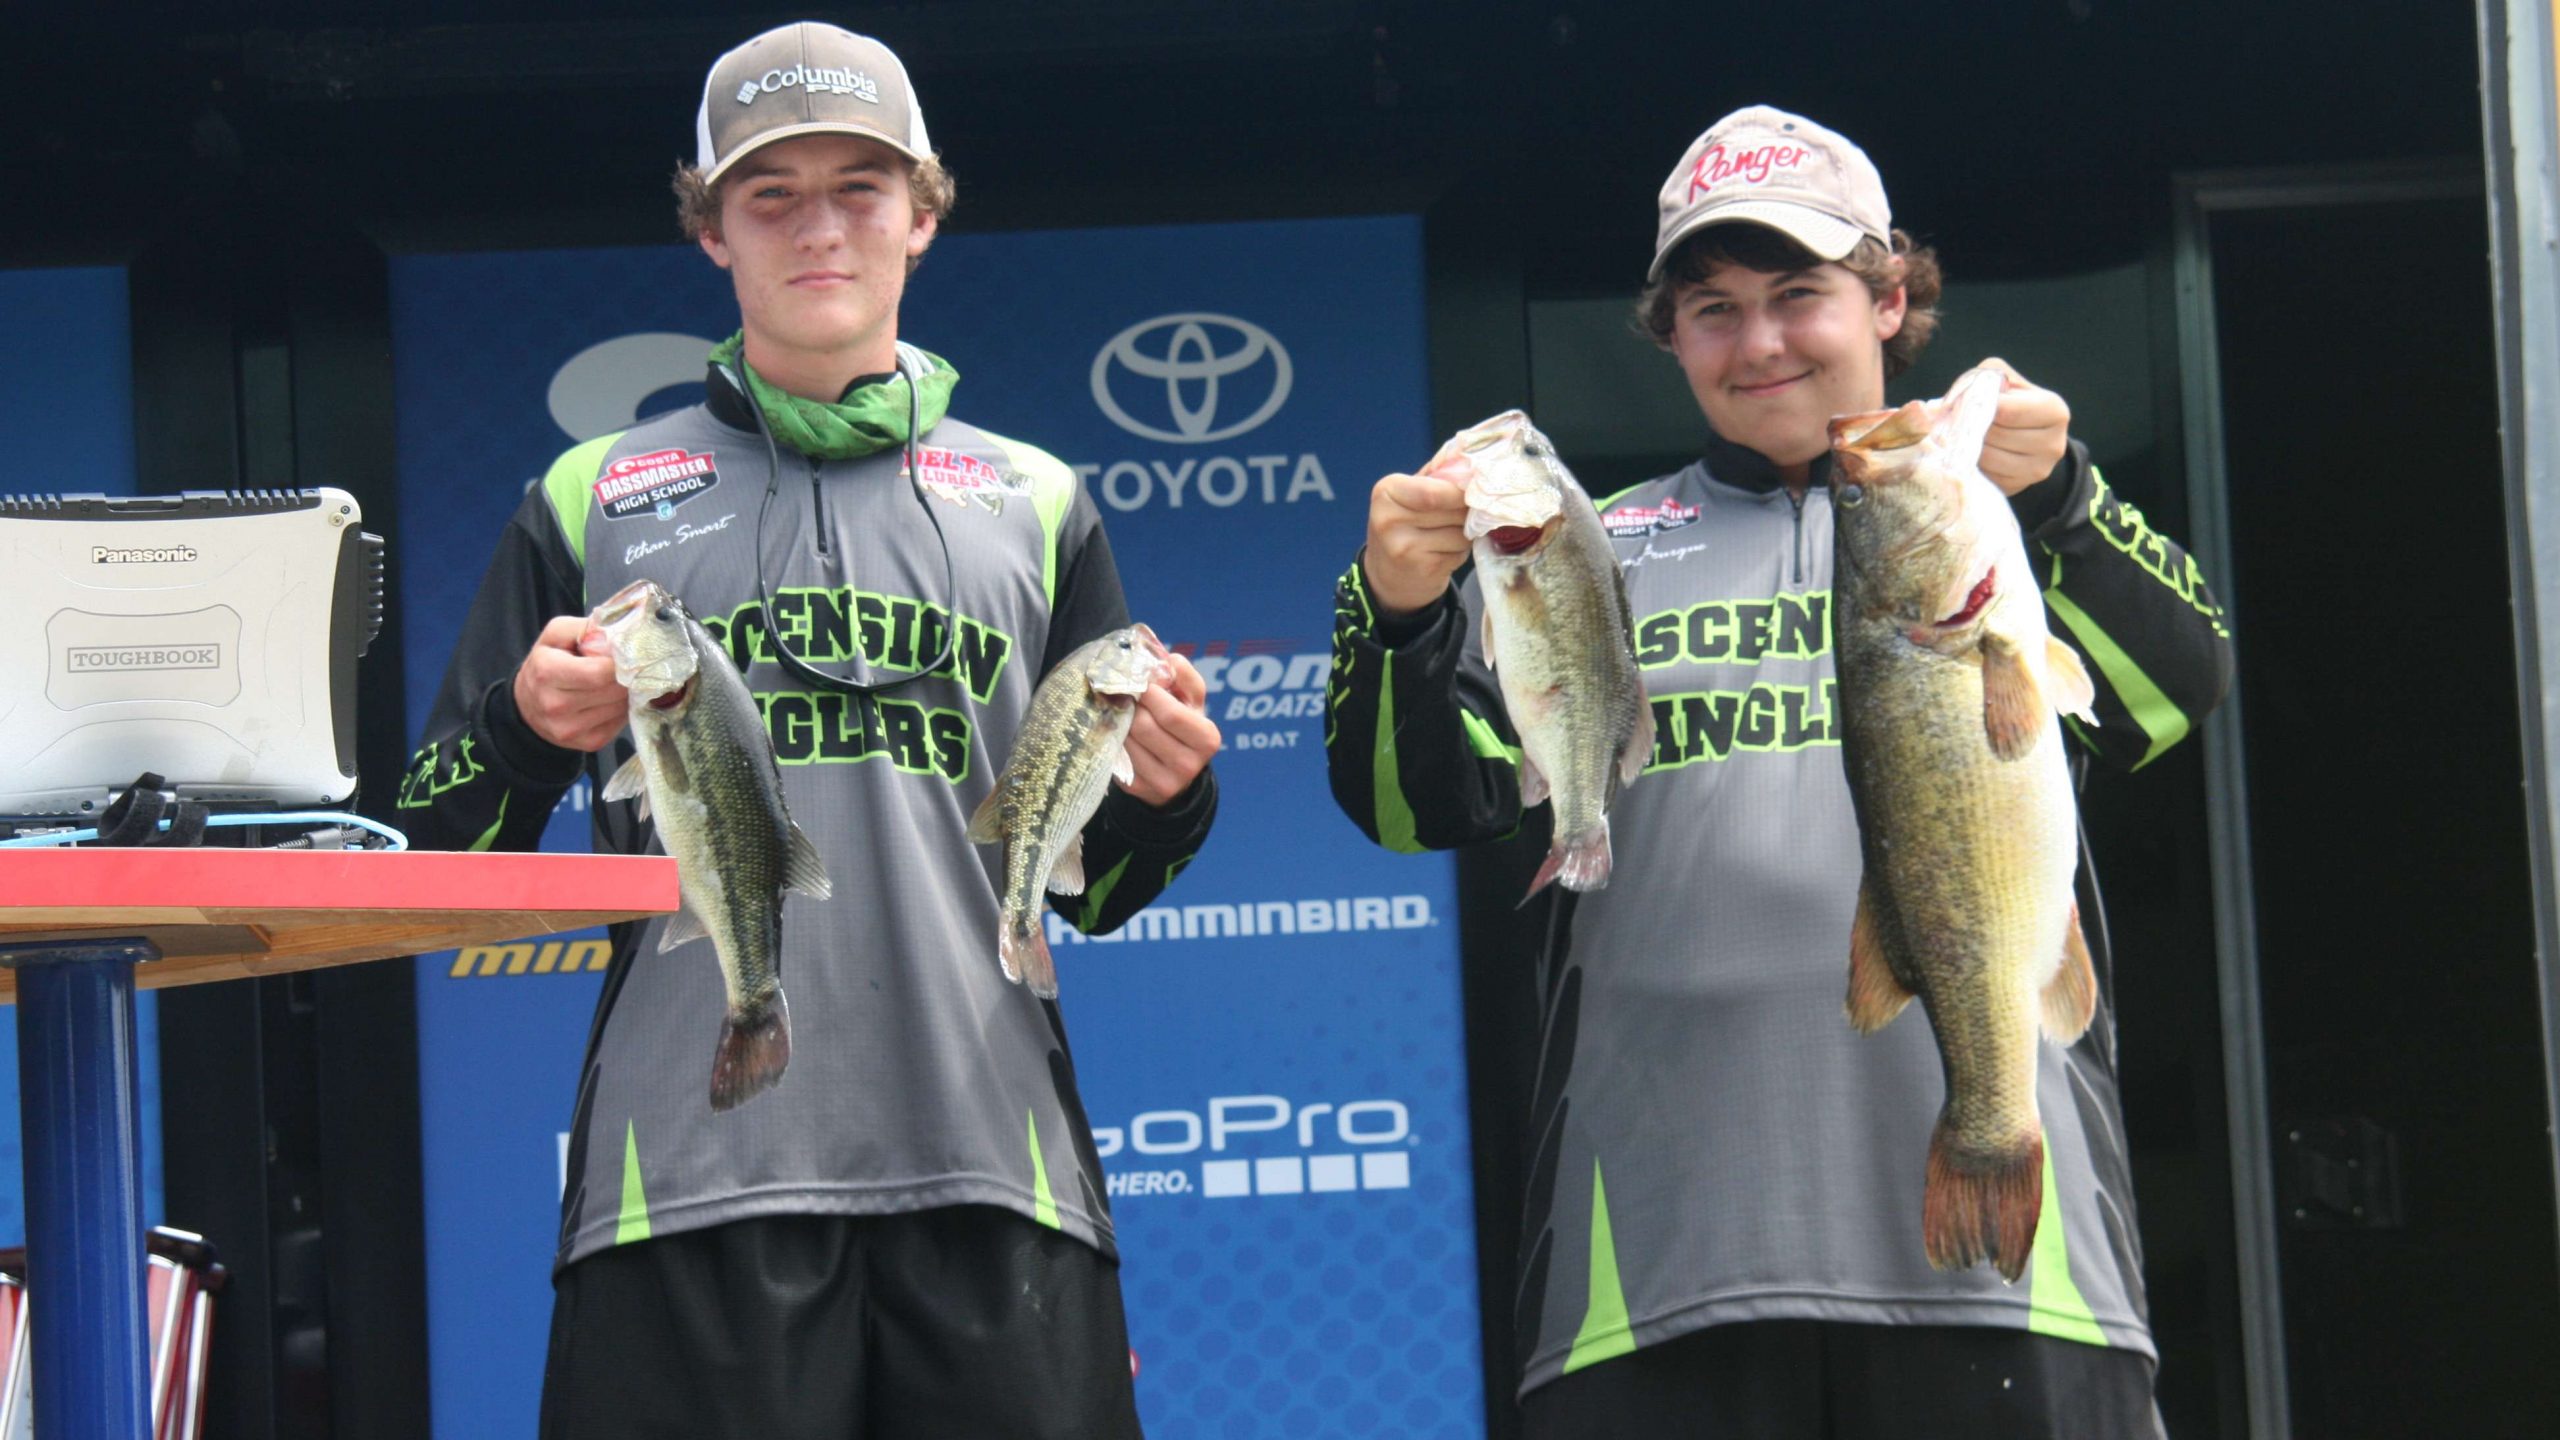 Ethan Smart and Grant Bourque of the Ascension (La.) Anglers show the haul that earned them sixth place overall. Bourque caught the big bass of the tournament -- the 6-pound, 15-ounce giant at far right. The team caught 12-2 total.